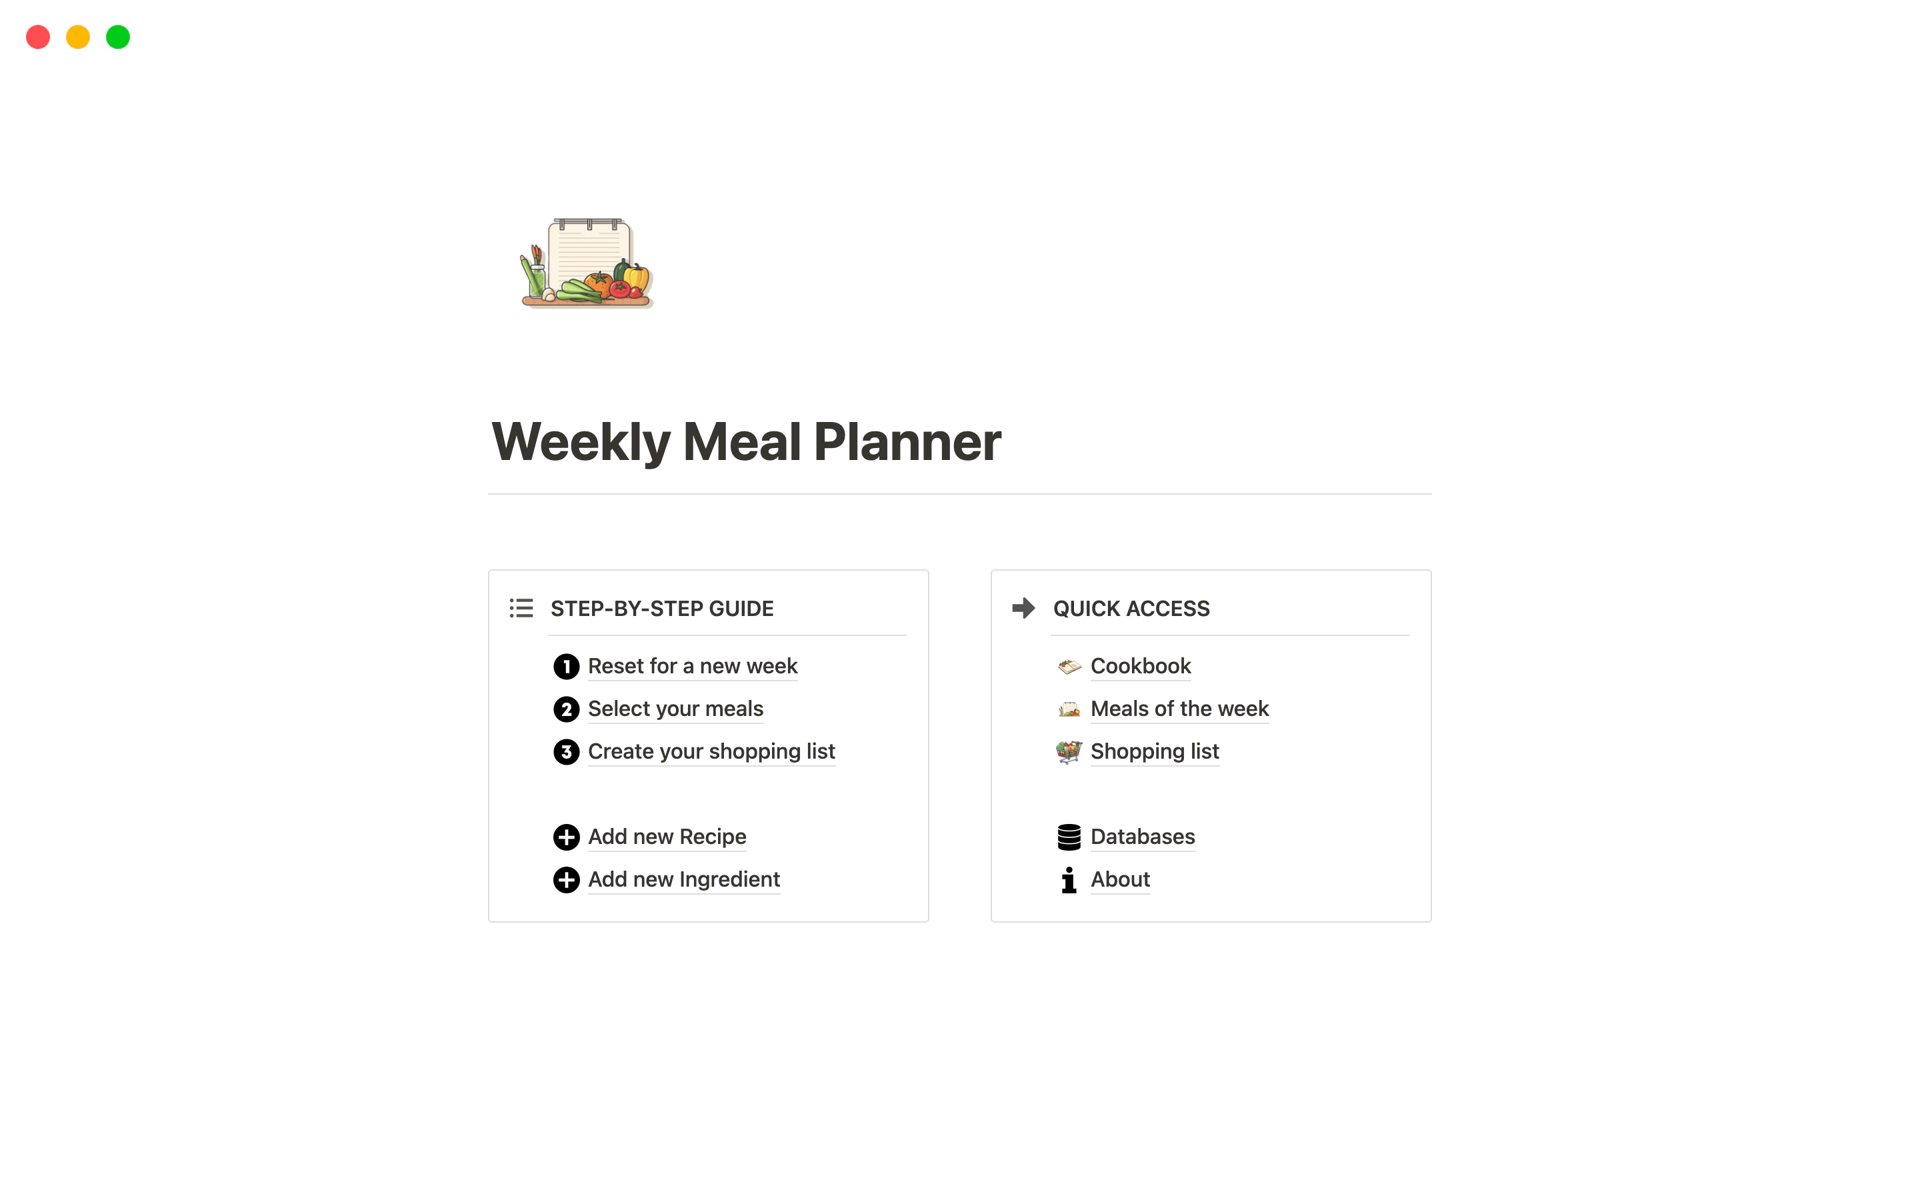 My Weekly Meal Planner streamlines your culinary journey, guiding you step-by-step in selecting meals and automatically generating shopping lists based on your chosen recipes.